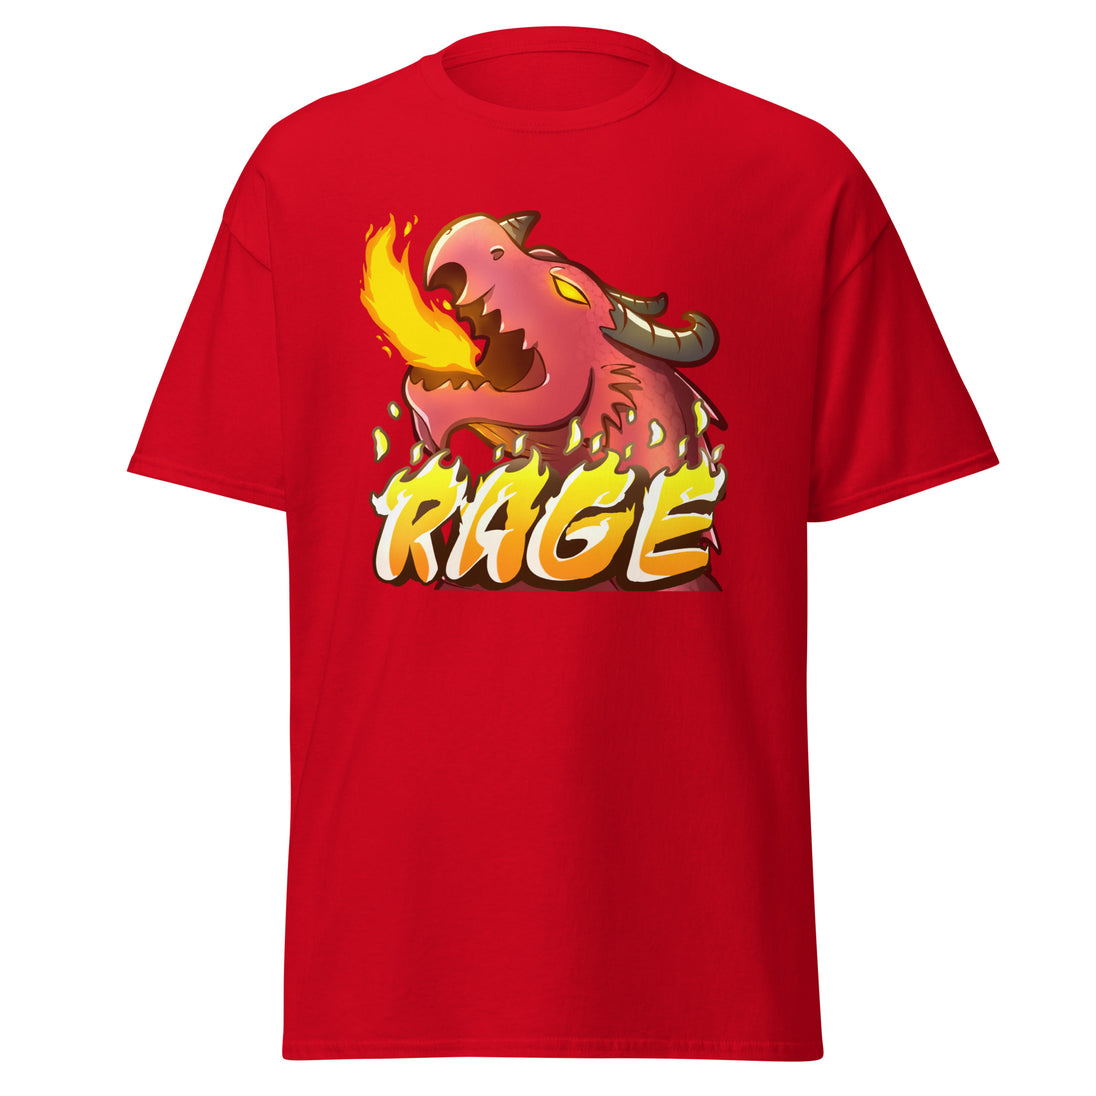 Dragon Rage T-Shirt - Soft, Comfortable, and Stylish for Gamers and Streamers